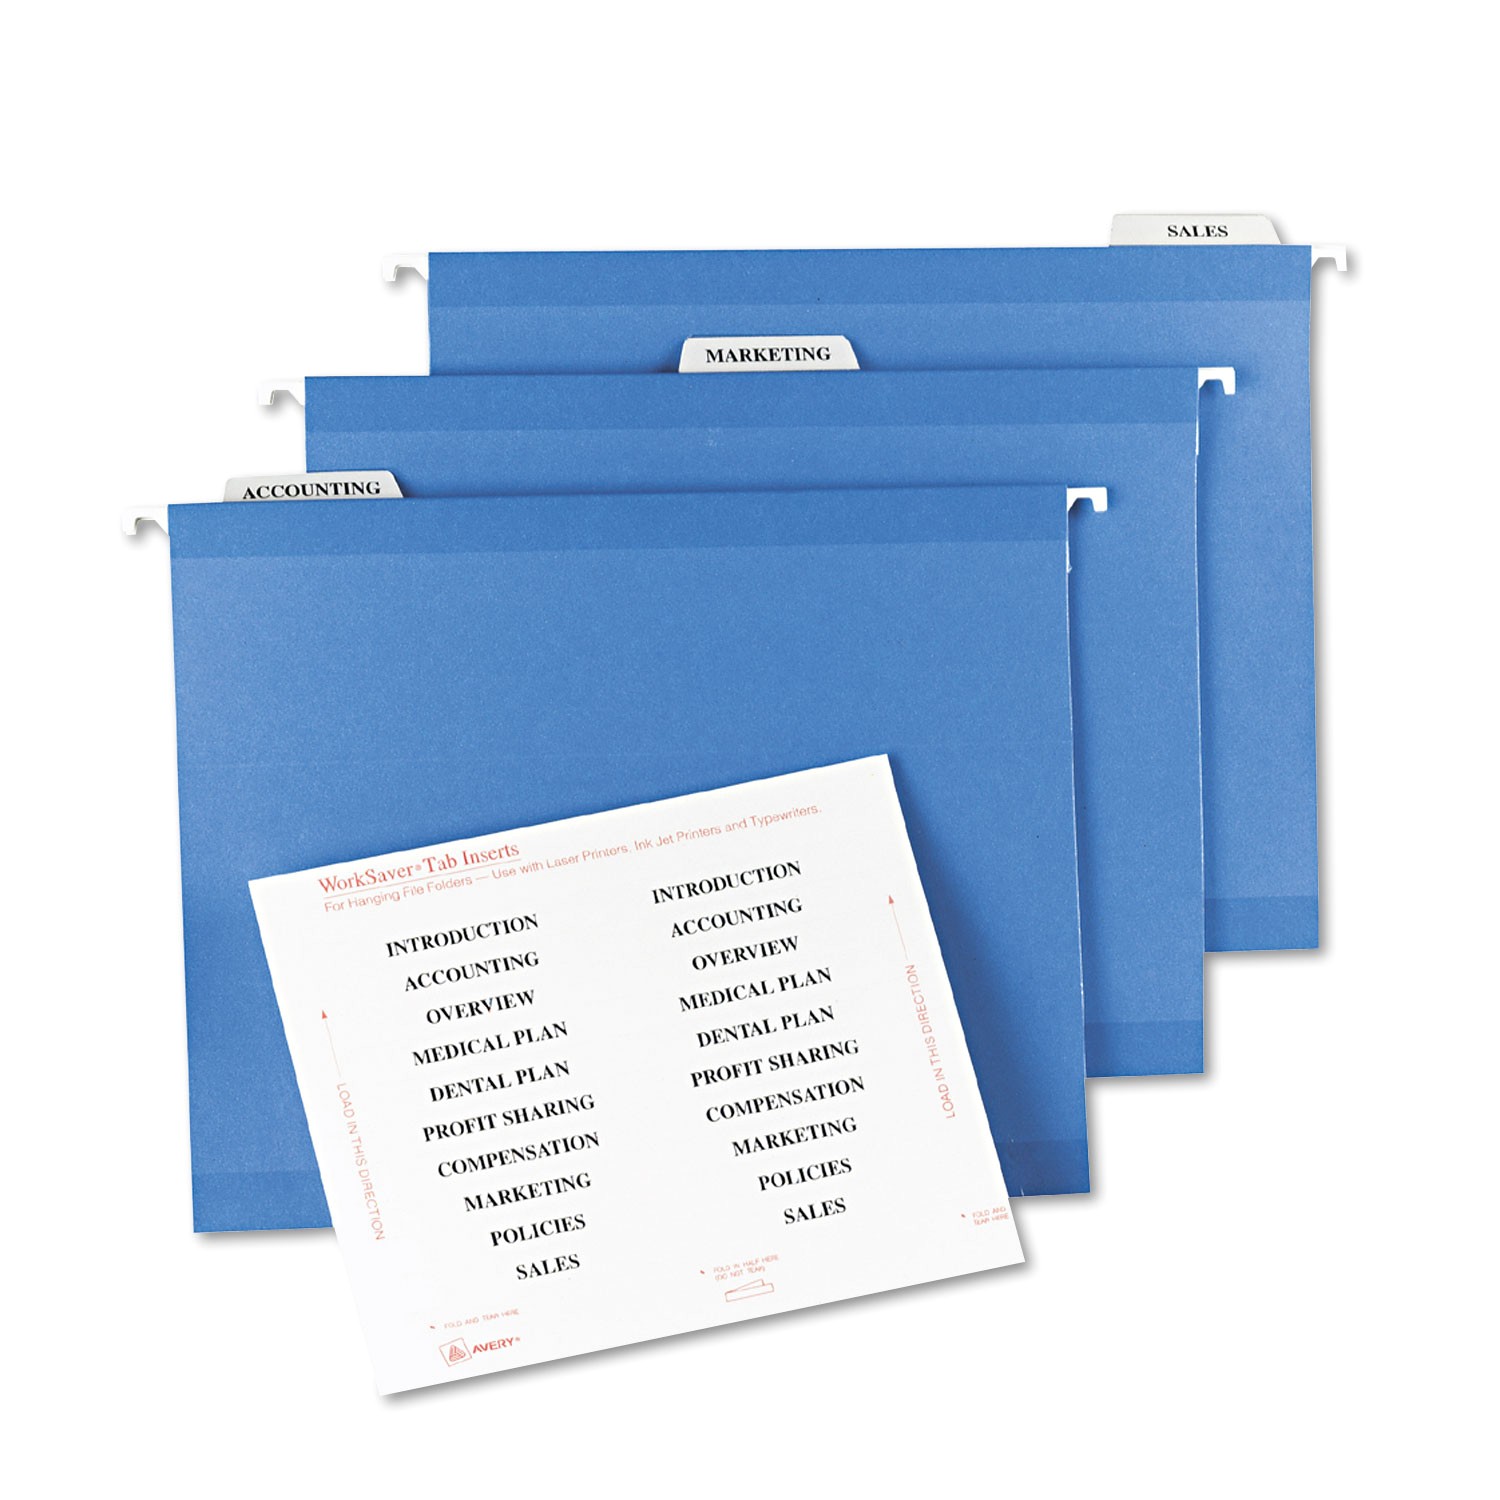 avery hanging file labels template